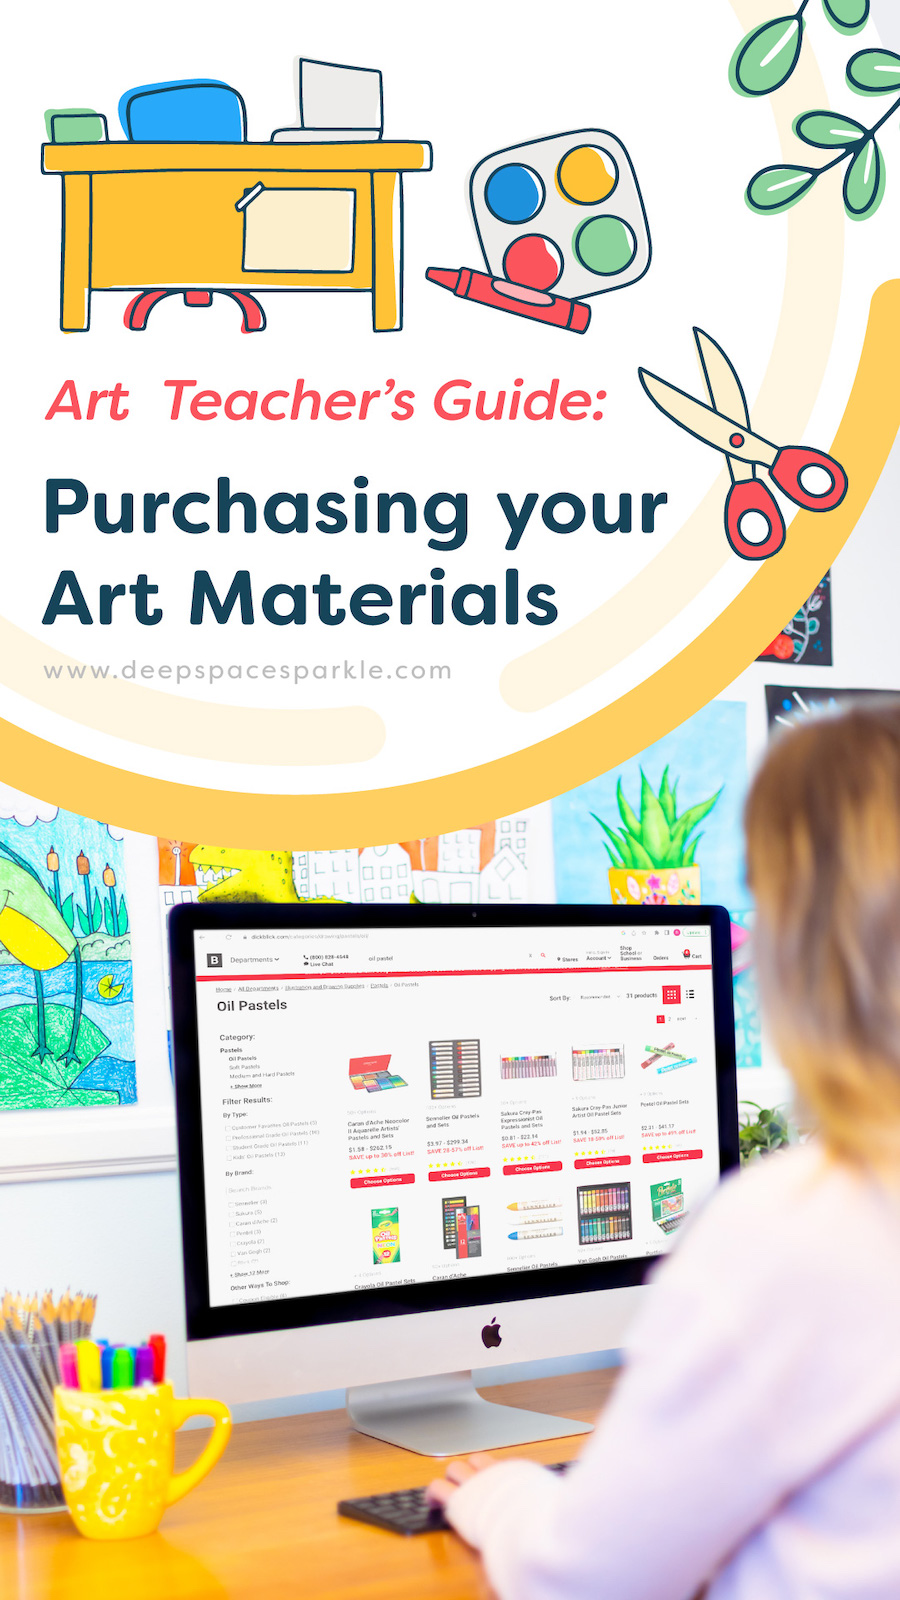 https://www.deepspacesparkle.com/guide-to-purchasing-your-art-materials/